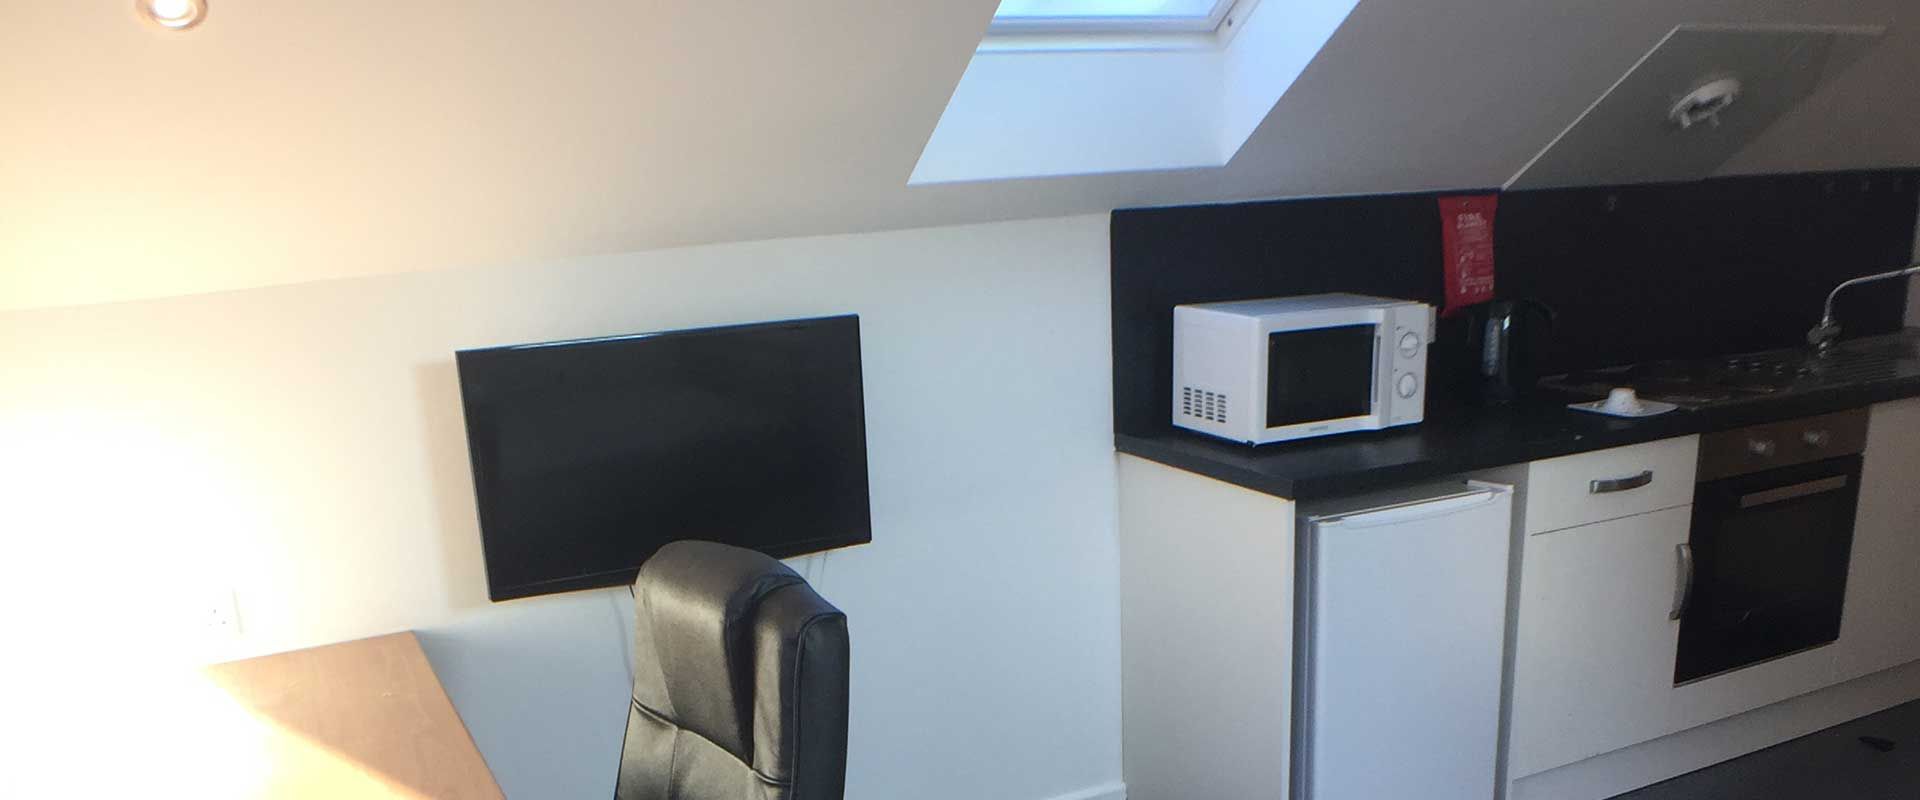 Radmoor House Loughborough Student Accommodation - Enjoy a flat screen TV in every room